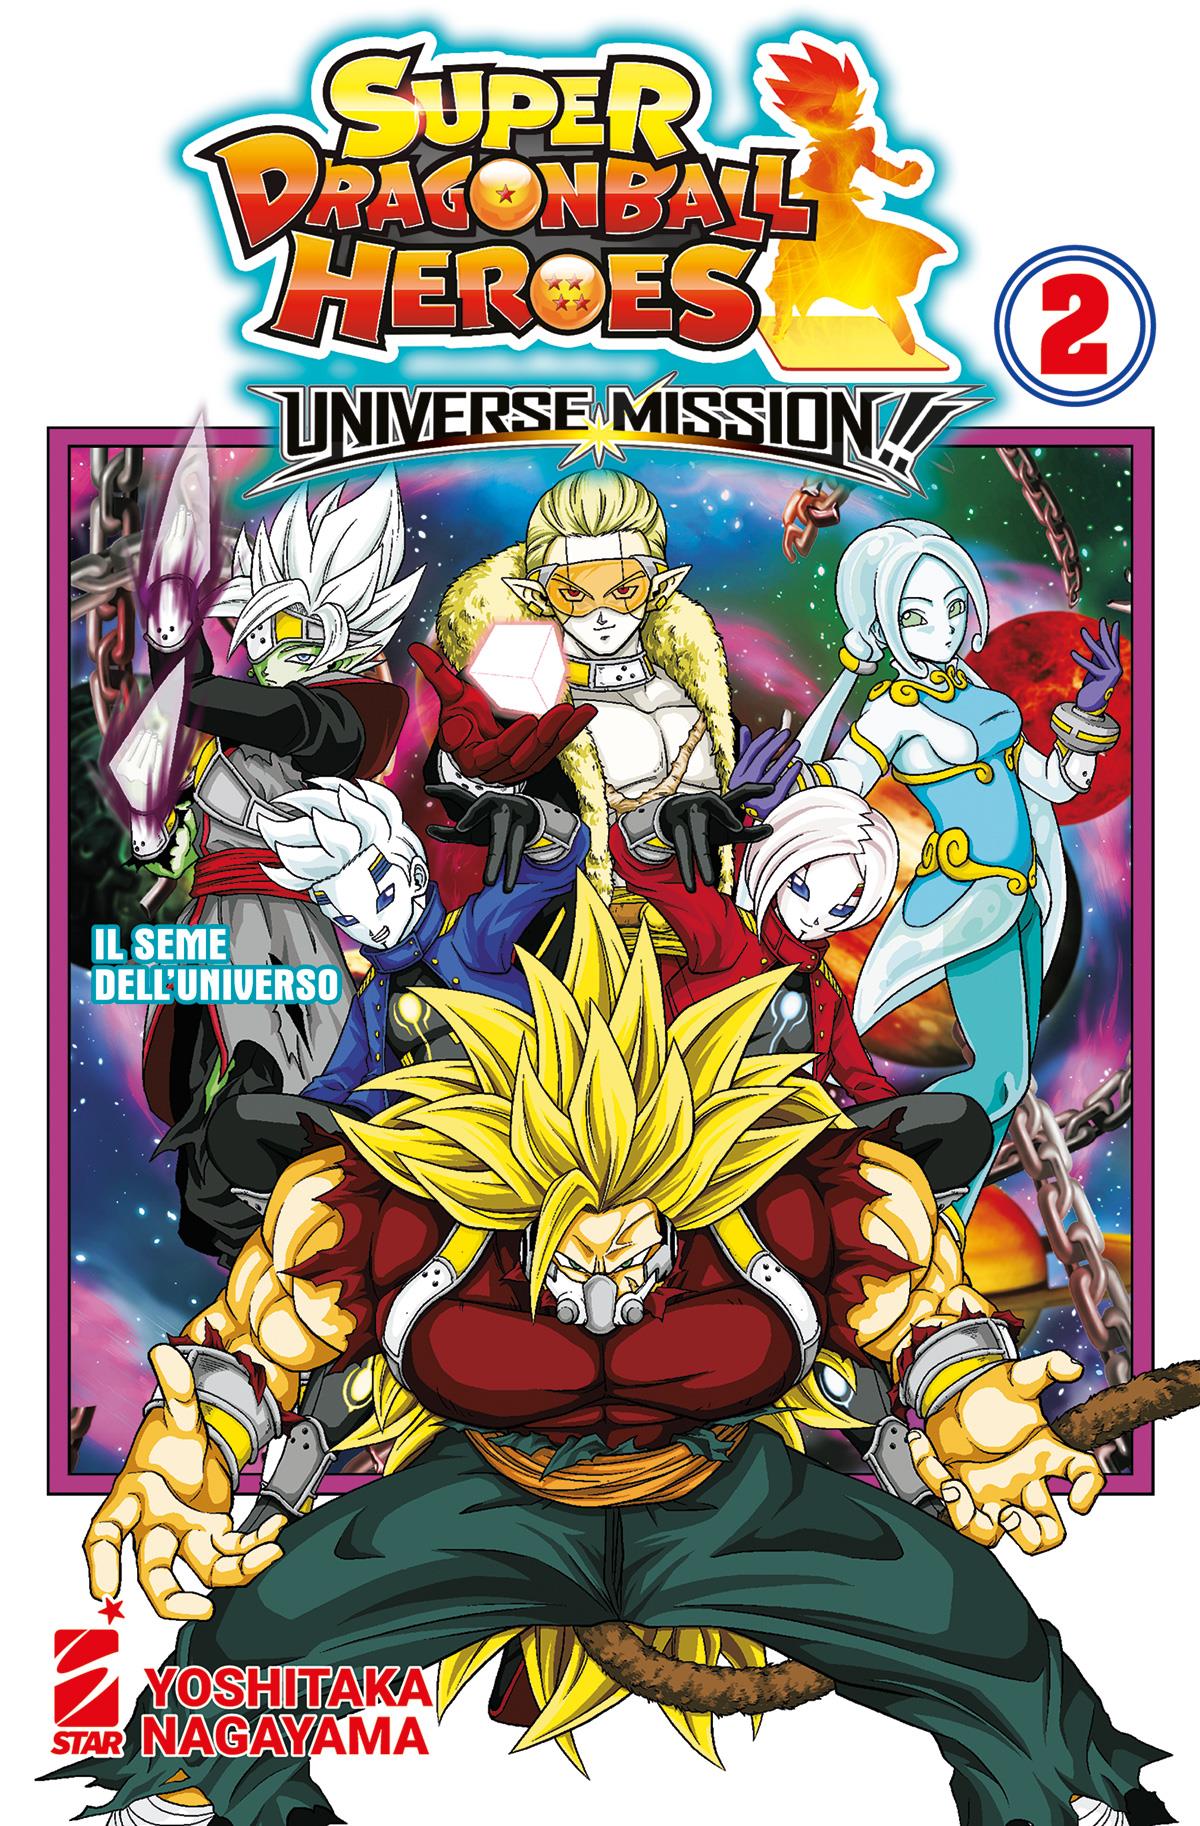 SUPER DRAGON BALL HEROES - UNIVERSE MISSION!! 2